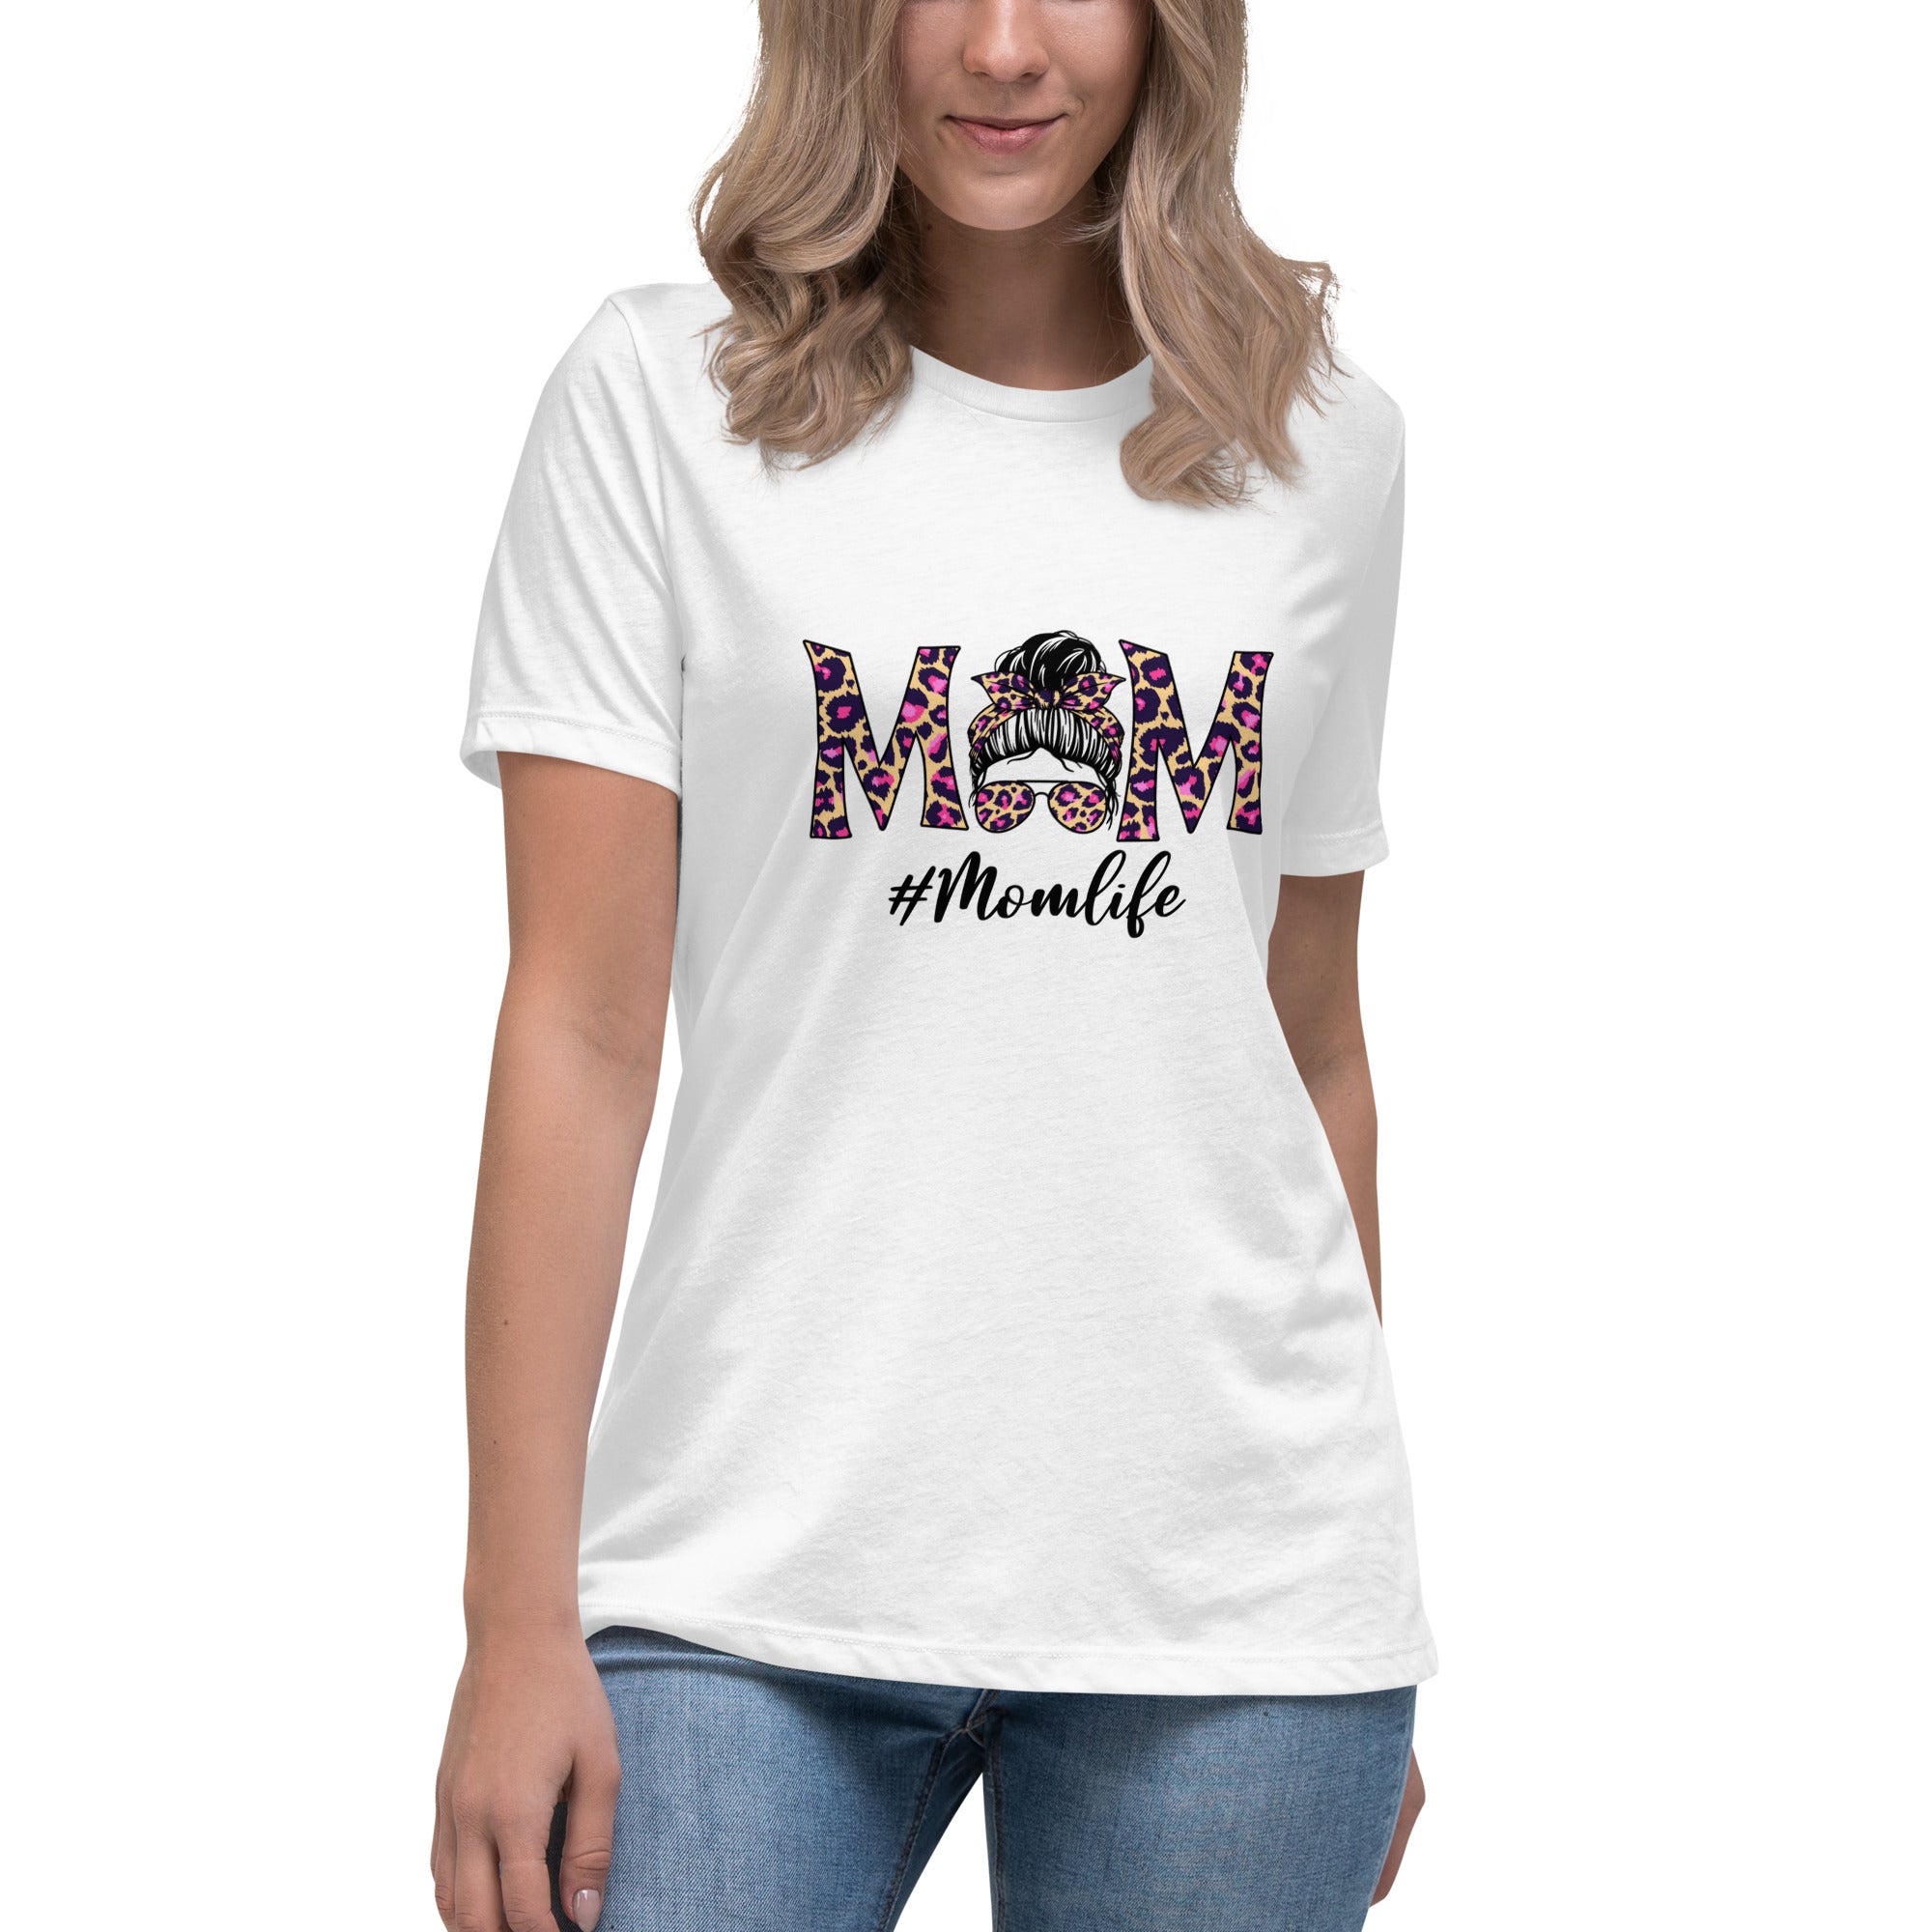 Mom Life - Women's Relaxed T-Shirt